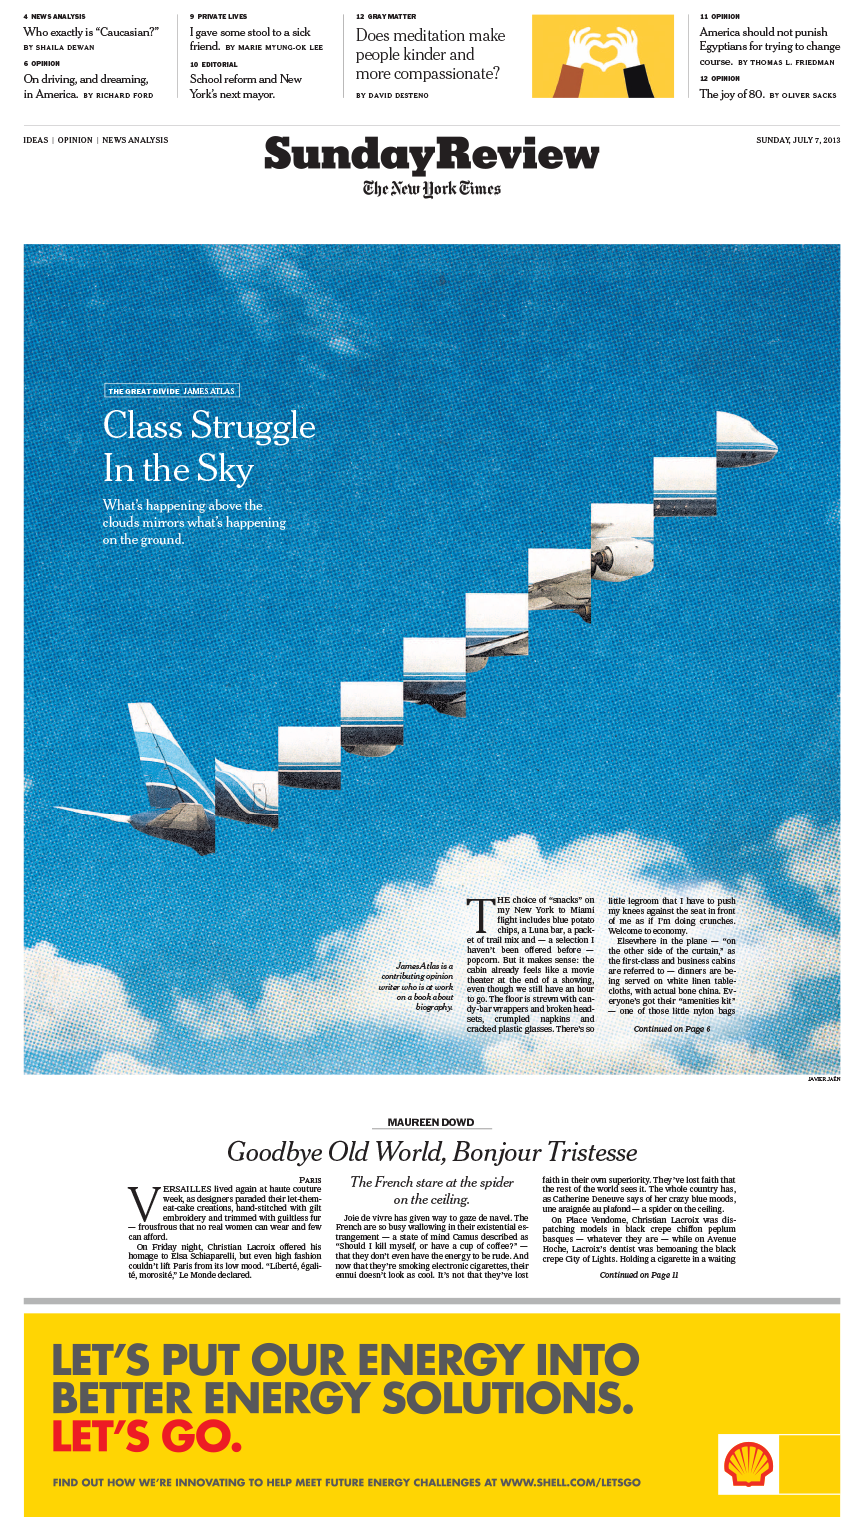 Sunday Review Cover: Class Struggle in the Sky